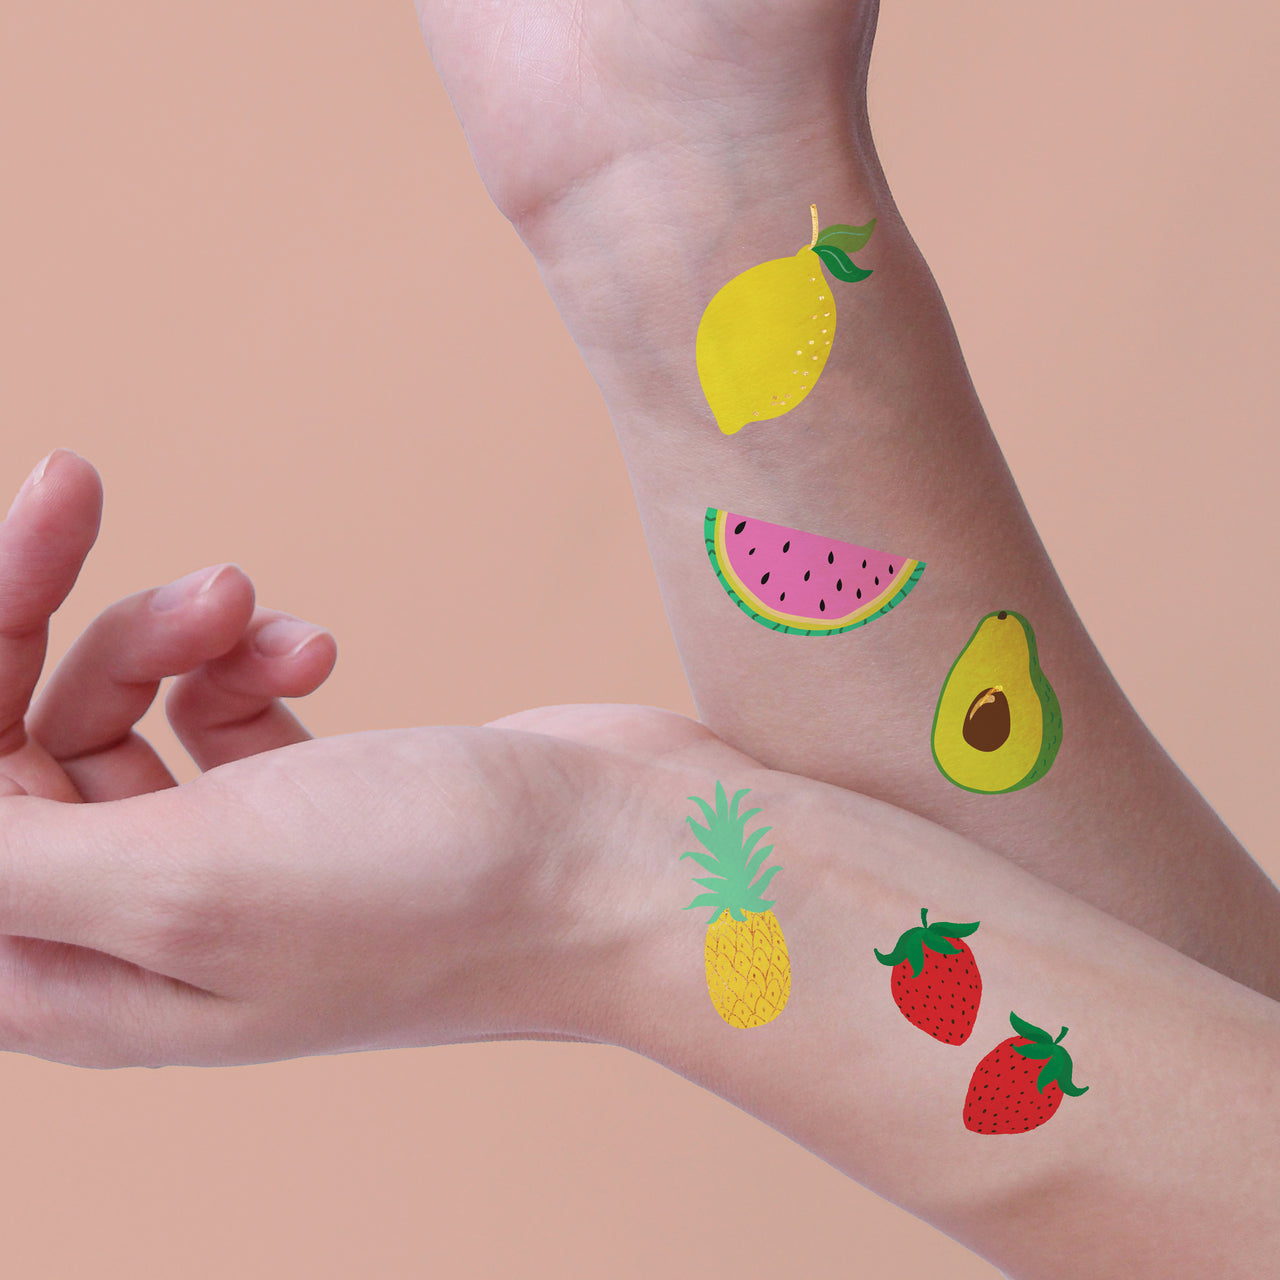 Sparkle all summer long in the Sweet Summer tattoo bundle-lemon, watermelon, avocado, pineapple and strawberries.